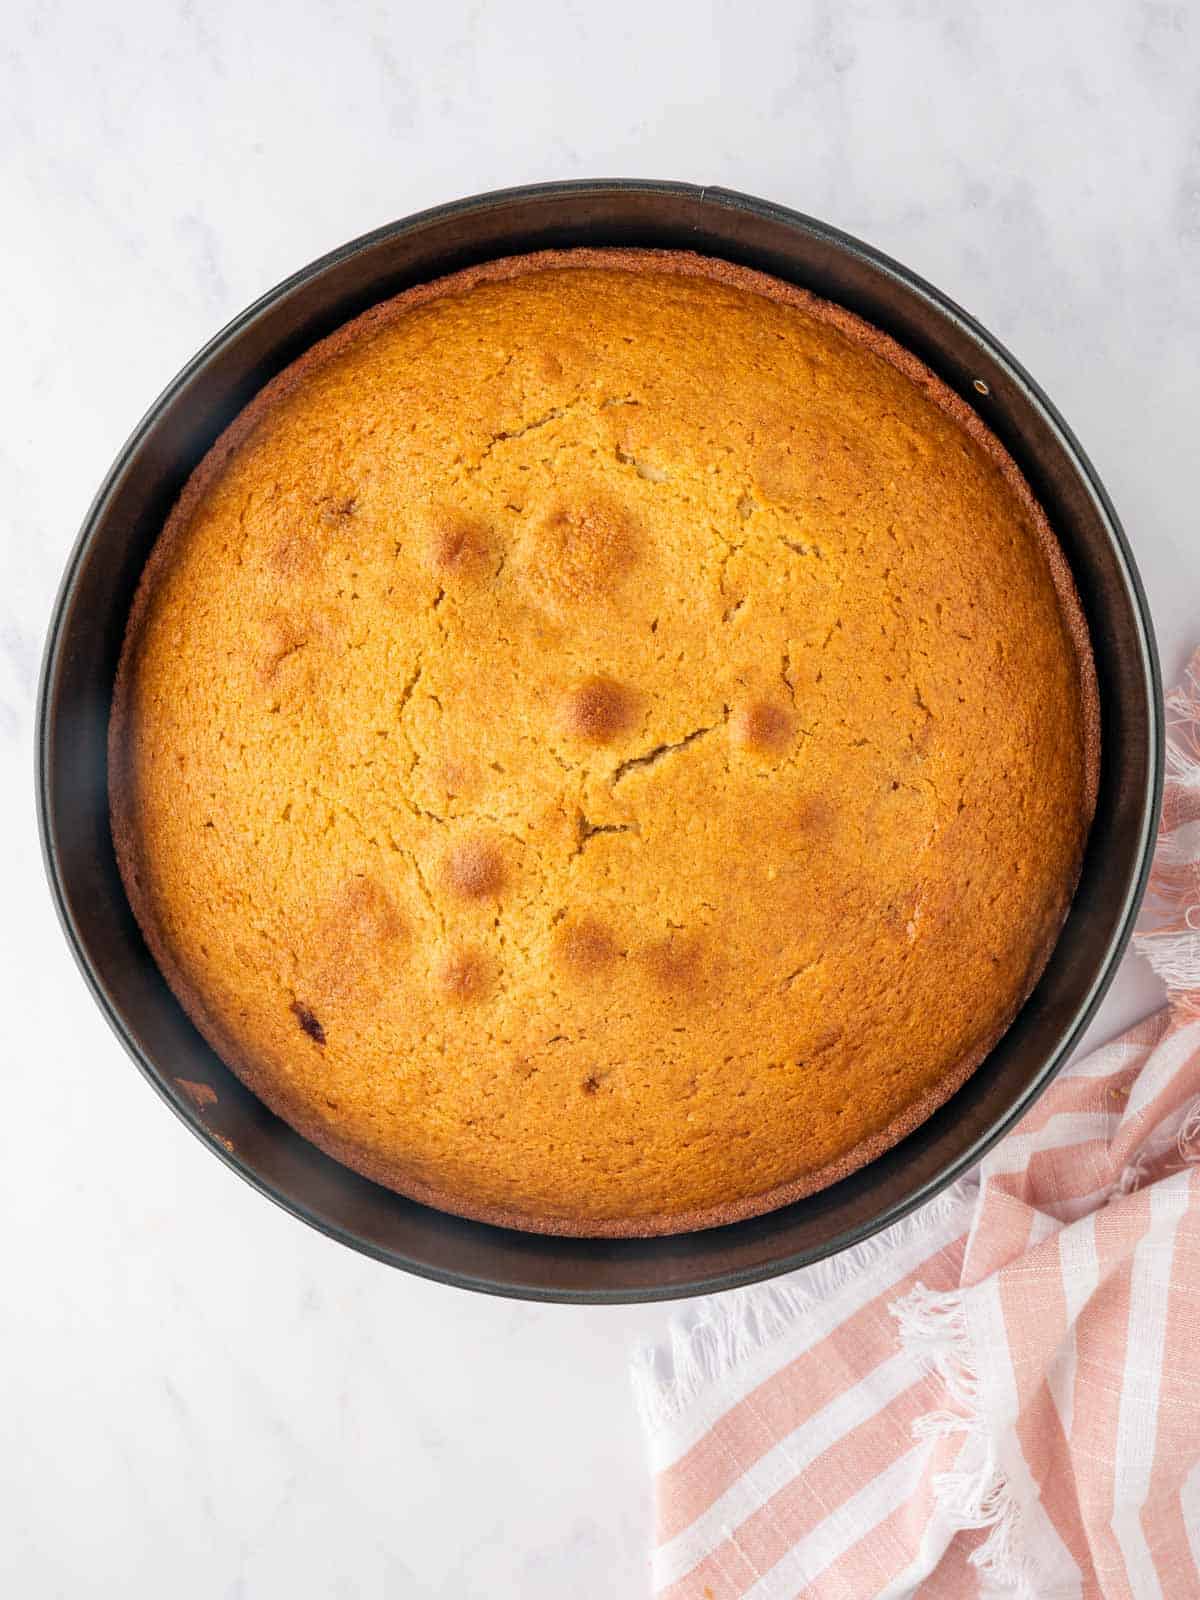 The cake layer is cooked to golden brown.